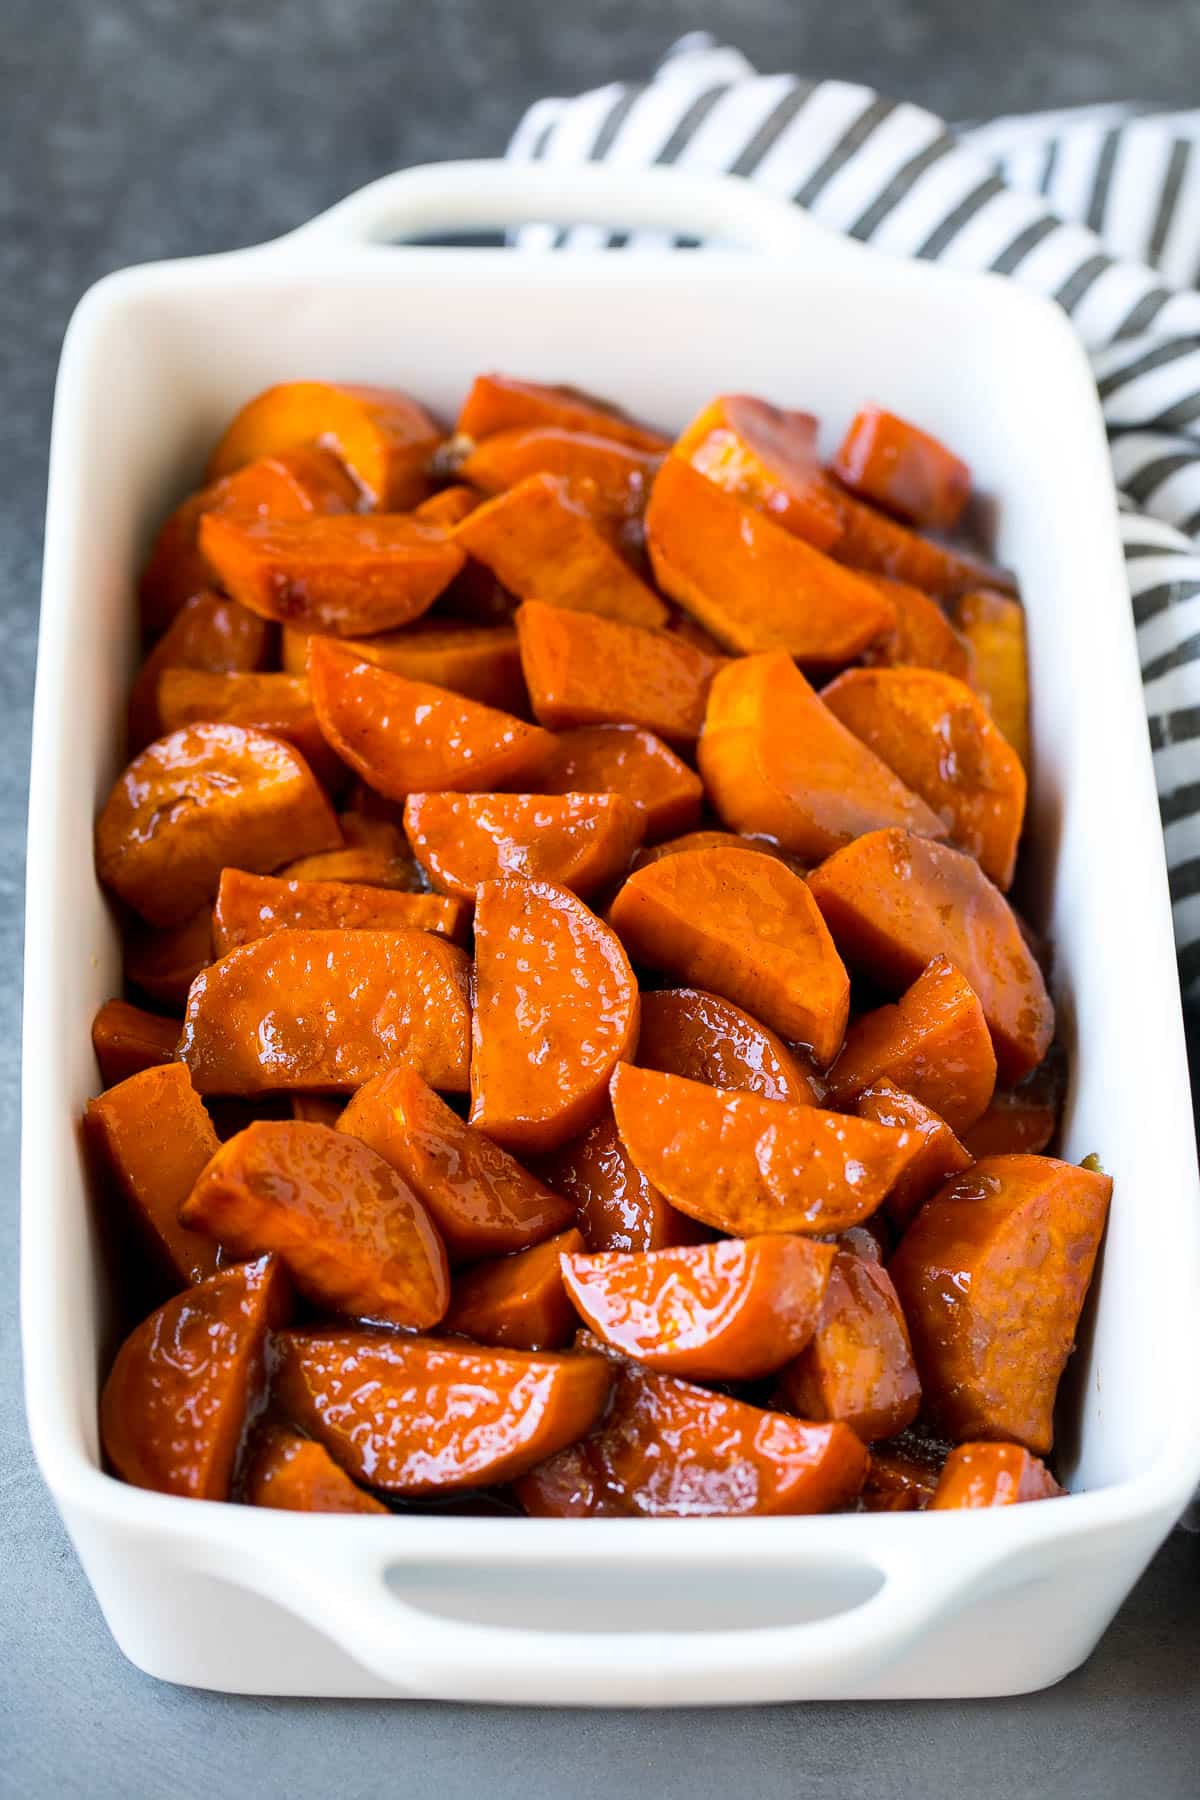 A baking dish filled with candied sweet potatoes.